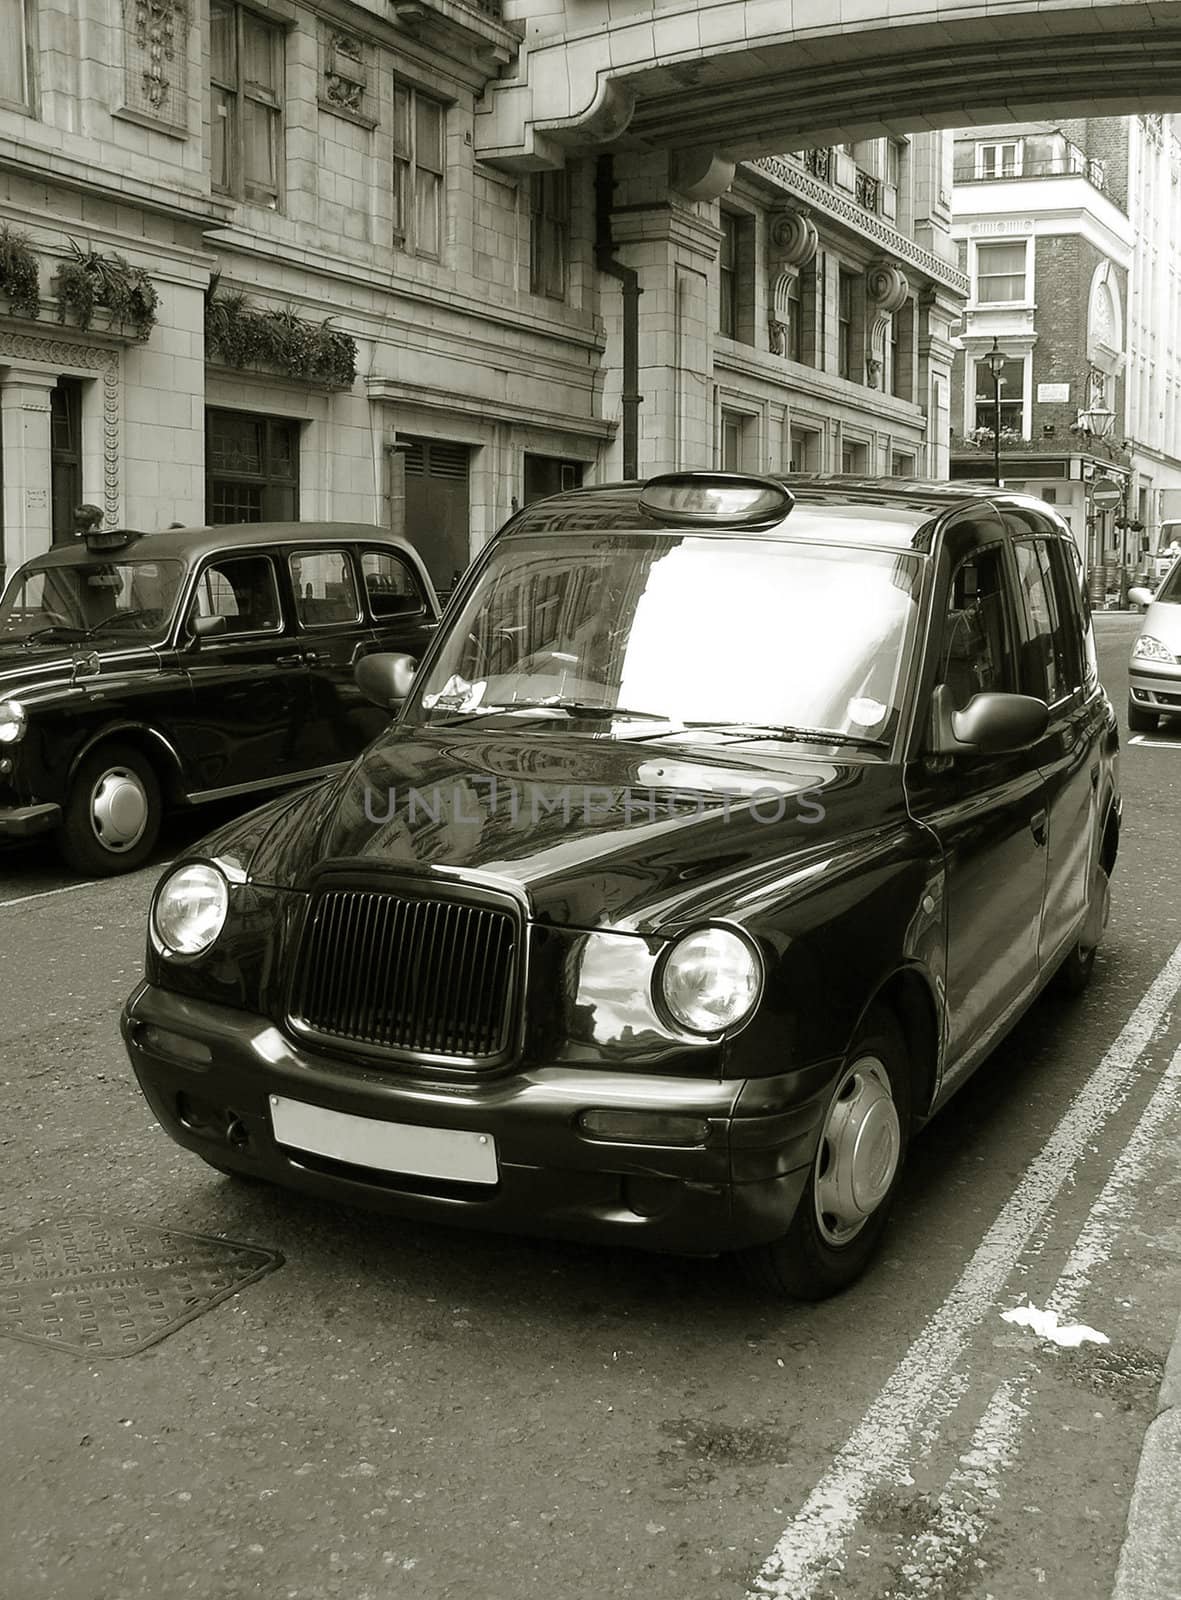 Classic Old London Cab by Alvinge